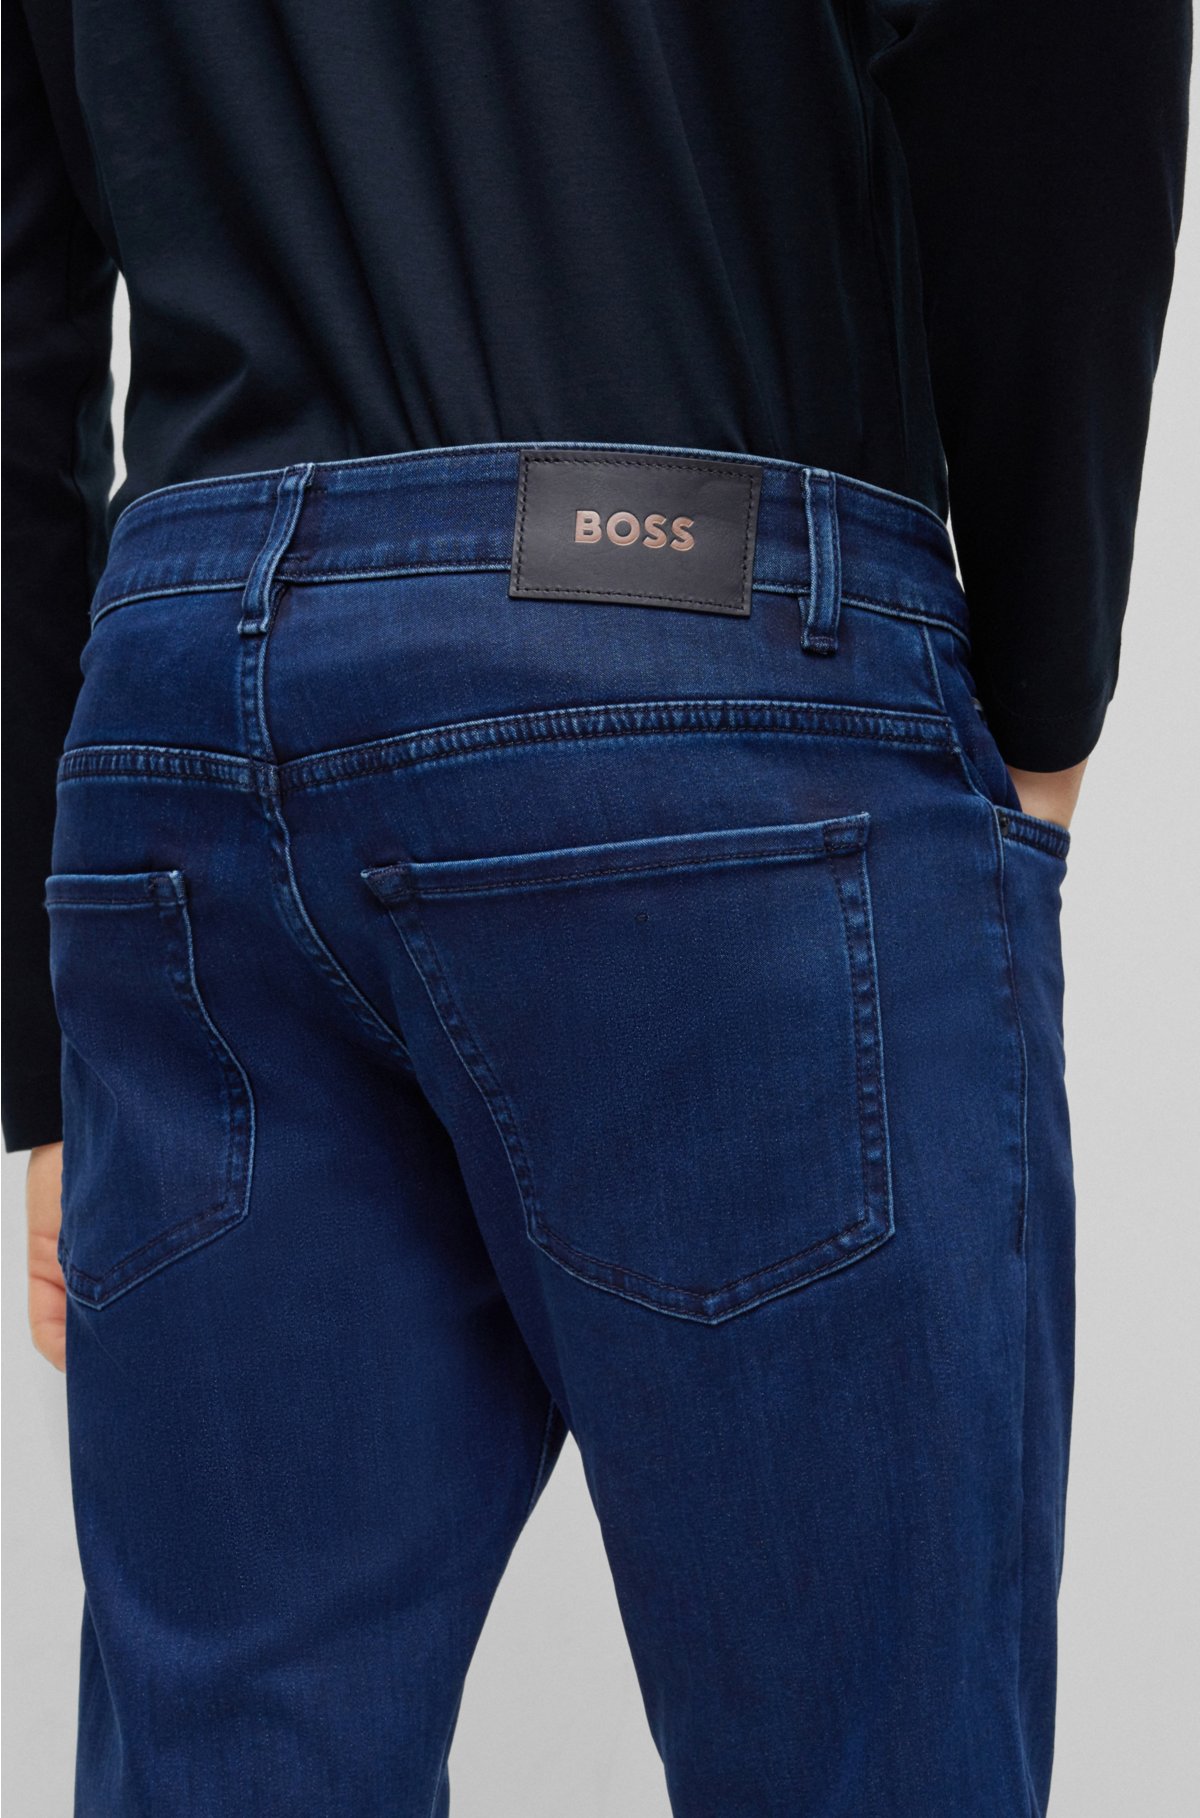 BOSS - Slim-fit in satin-touch blue denim jeans